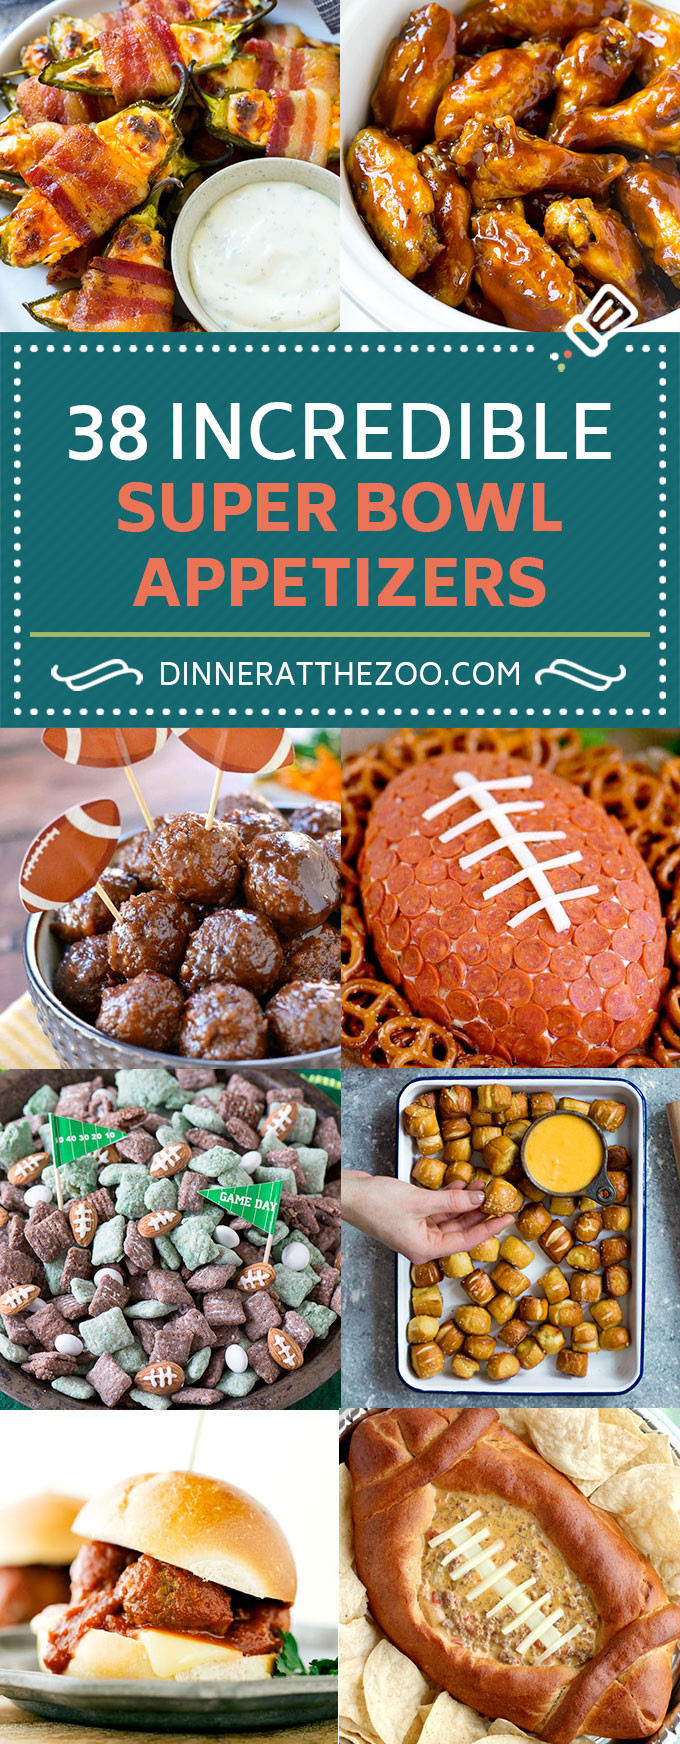 Fun Super Bowl Recipes
 45 Incredible Super Bowl Appetizer Recipes Dinner at the Zoo